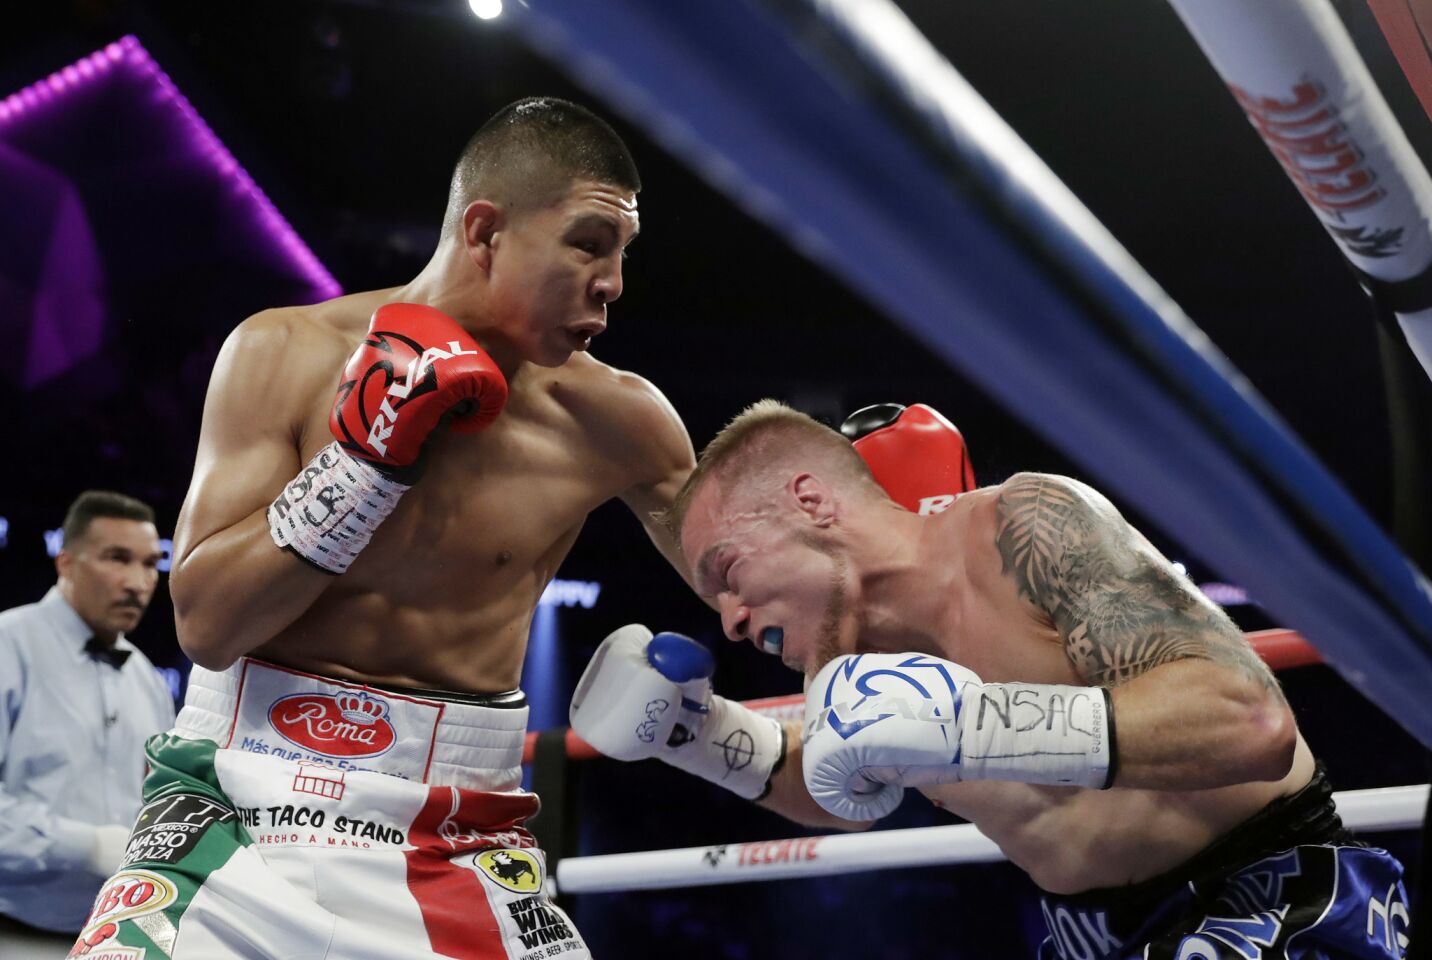 Jaime Munguia, left, punches Brandon Cook during their WBO junior middleweight championship boxing match, Saturday, Sept. 15, 2018, in Las Vegas. Munguia won by TKO.